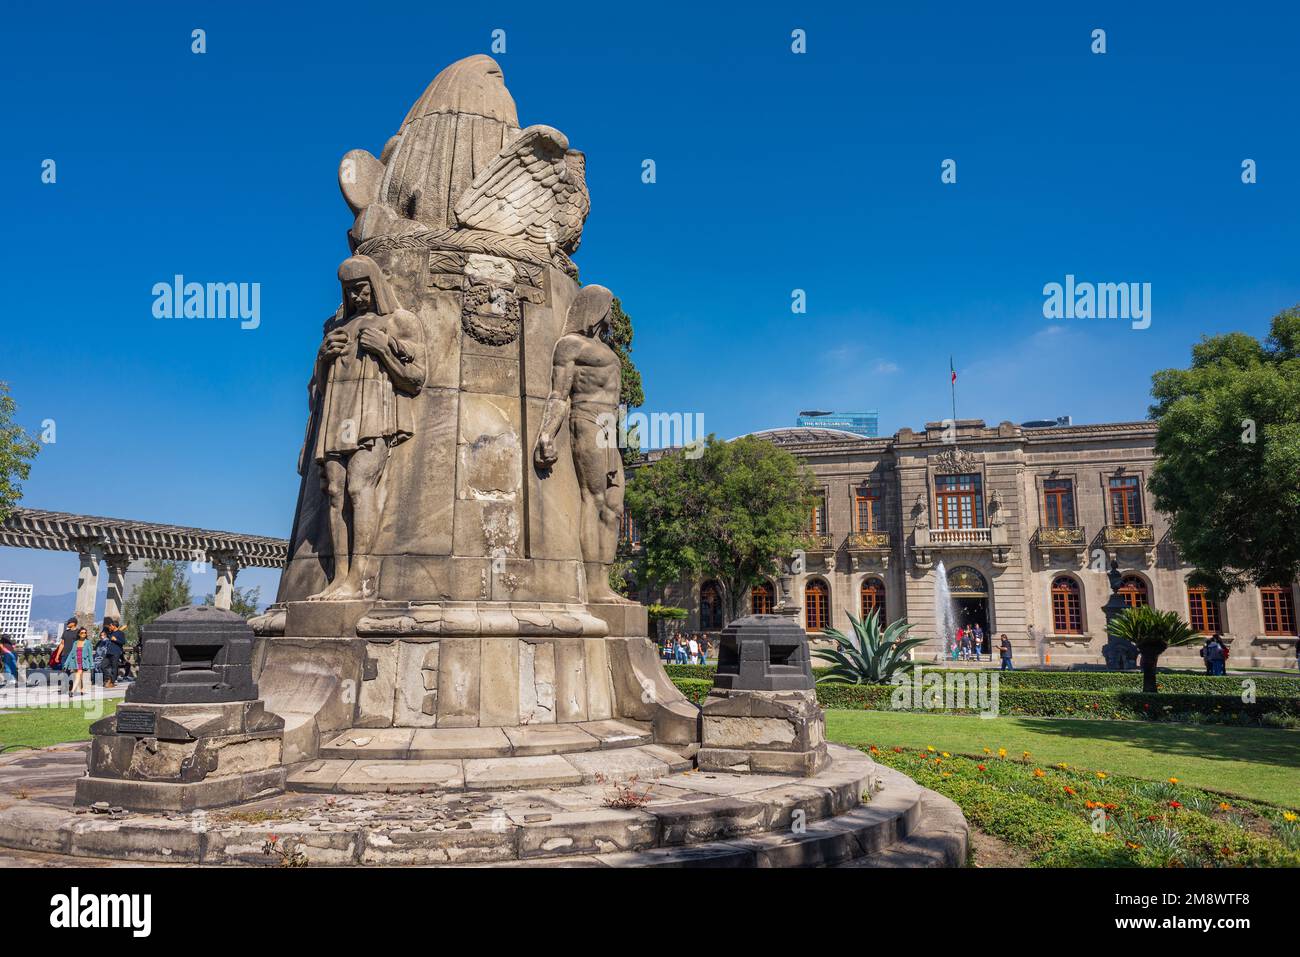 Departure from the National Museum of Chapultepec in the castle with a group of tourists leaving the garden with sculptures and water fountains Stock Photo